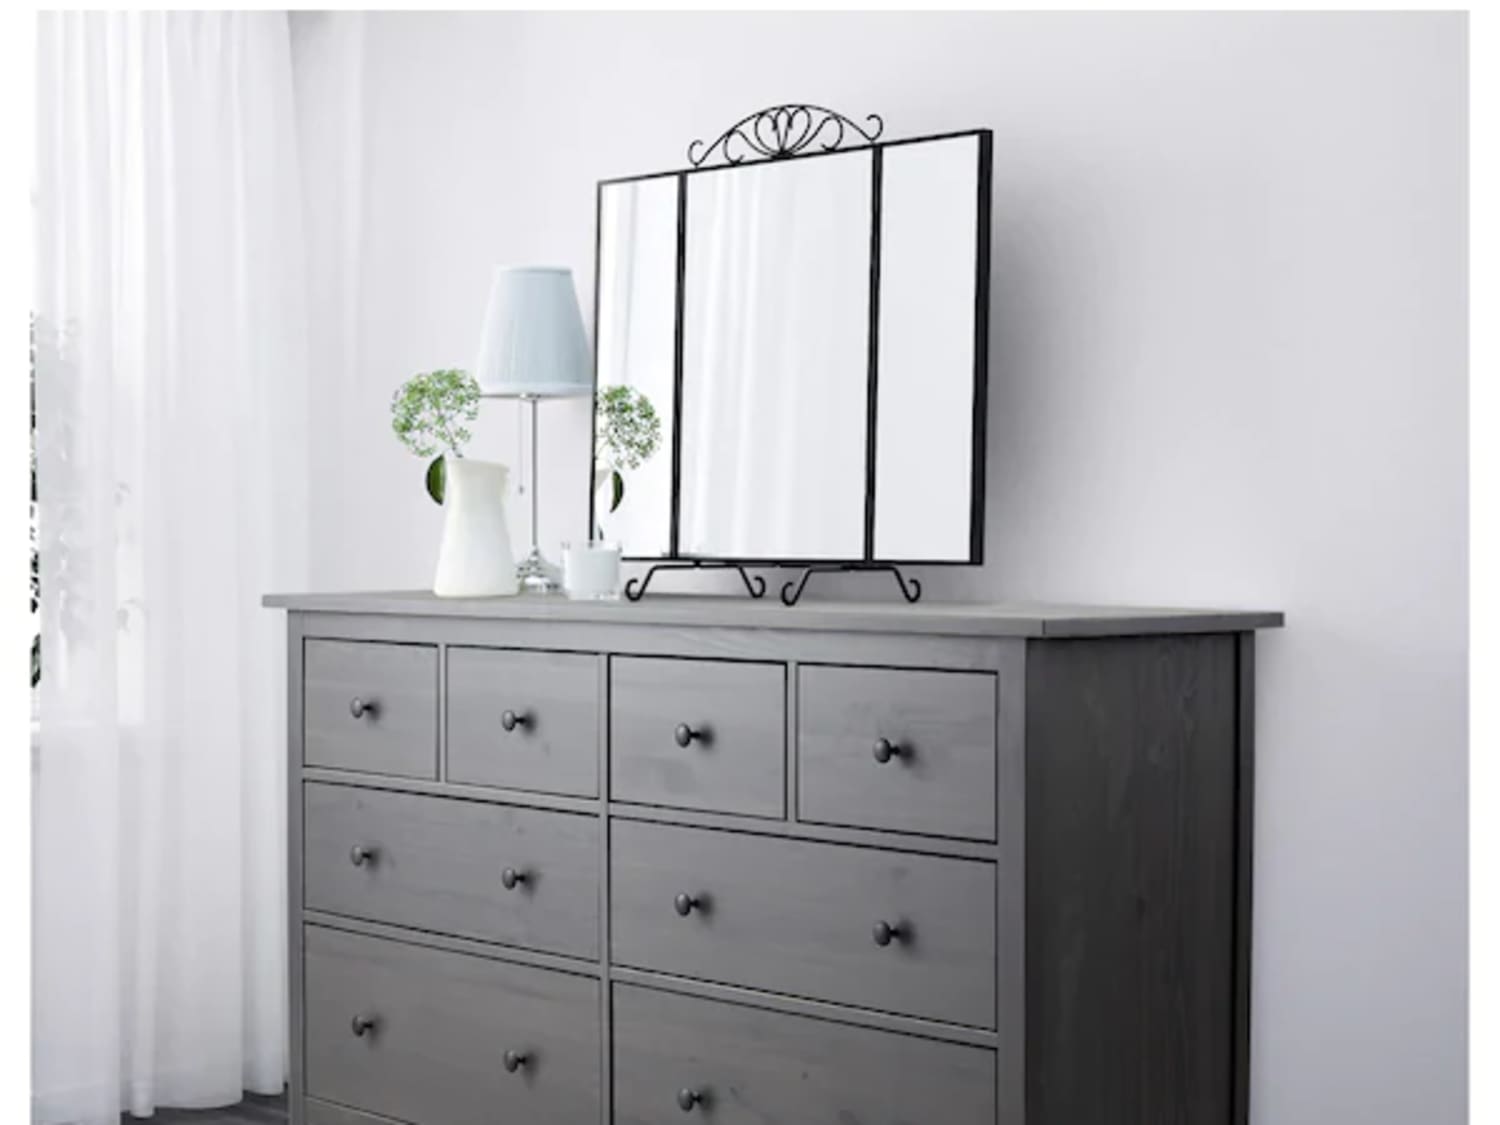 16 Clever IKEA Dresser Hacks You Need to Try